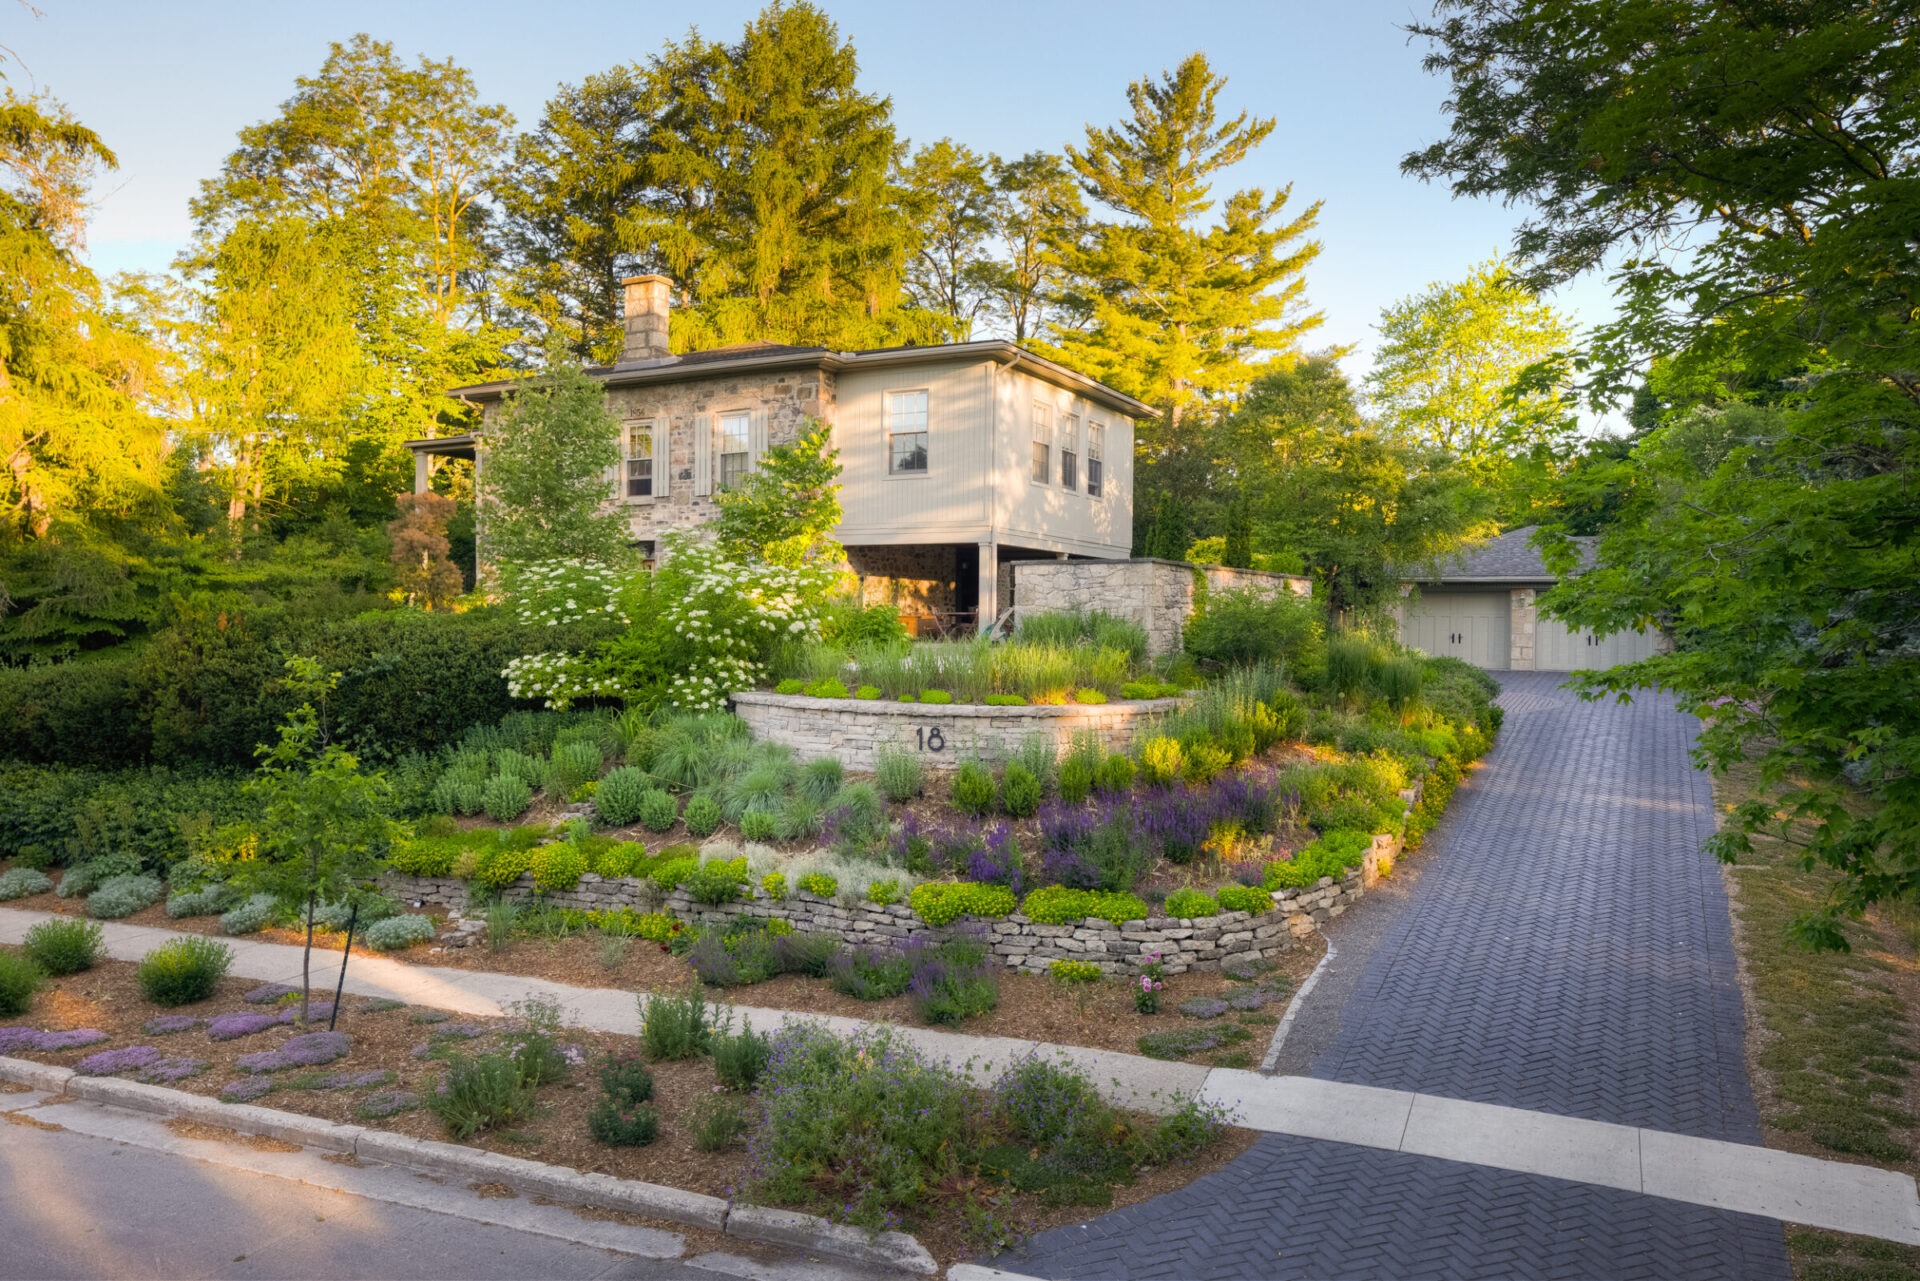 A two-story house with mixed siding, surrounded by lush landscaping and mature trees, sits beside a cobblestone driveway during golden hour.